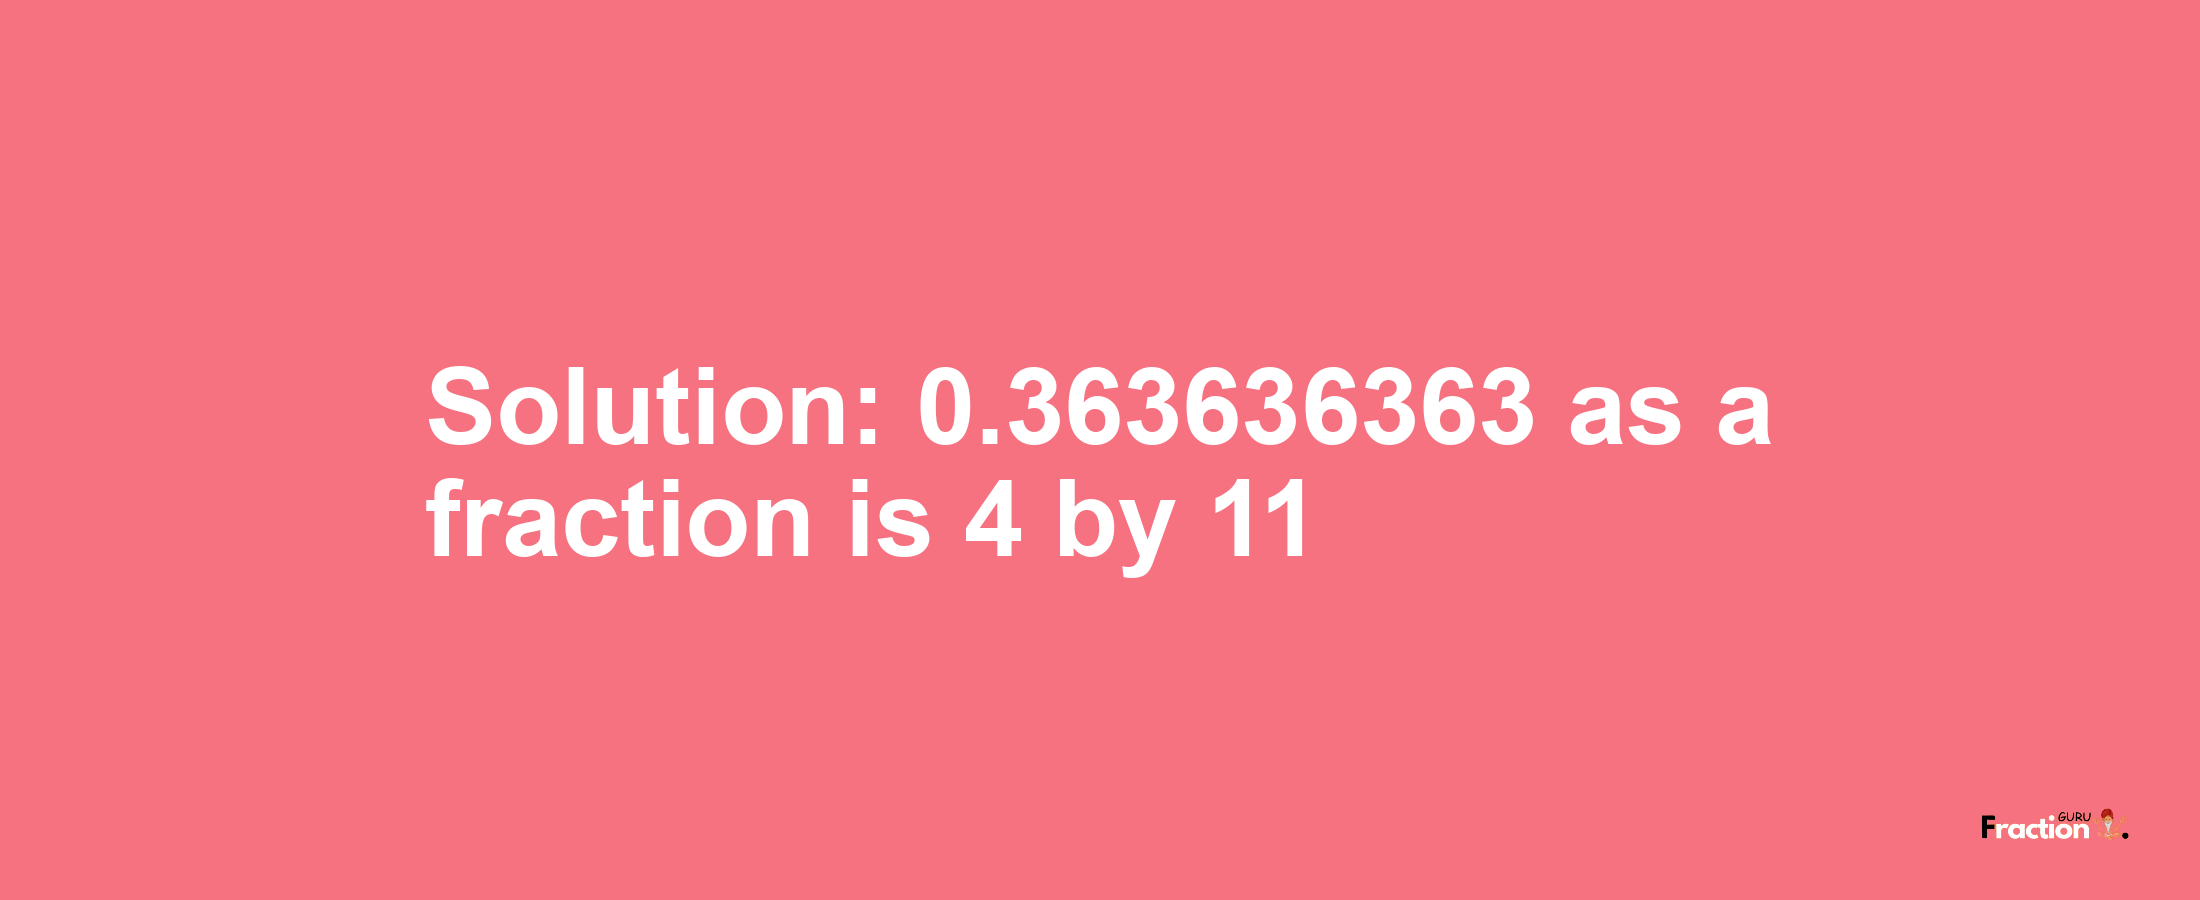 Solution:0.363636363 as a fraction is 4/11